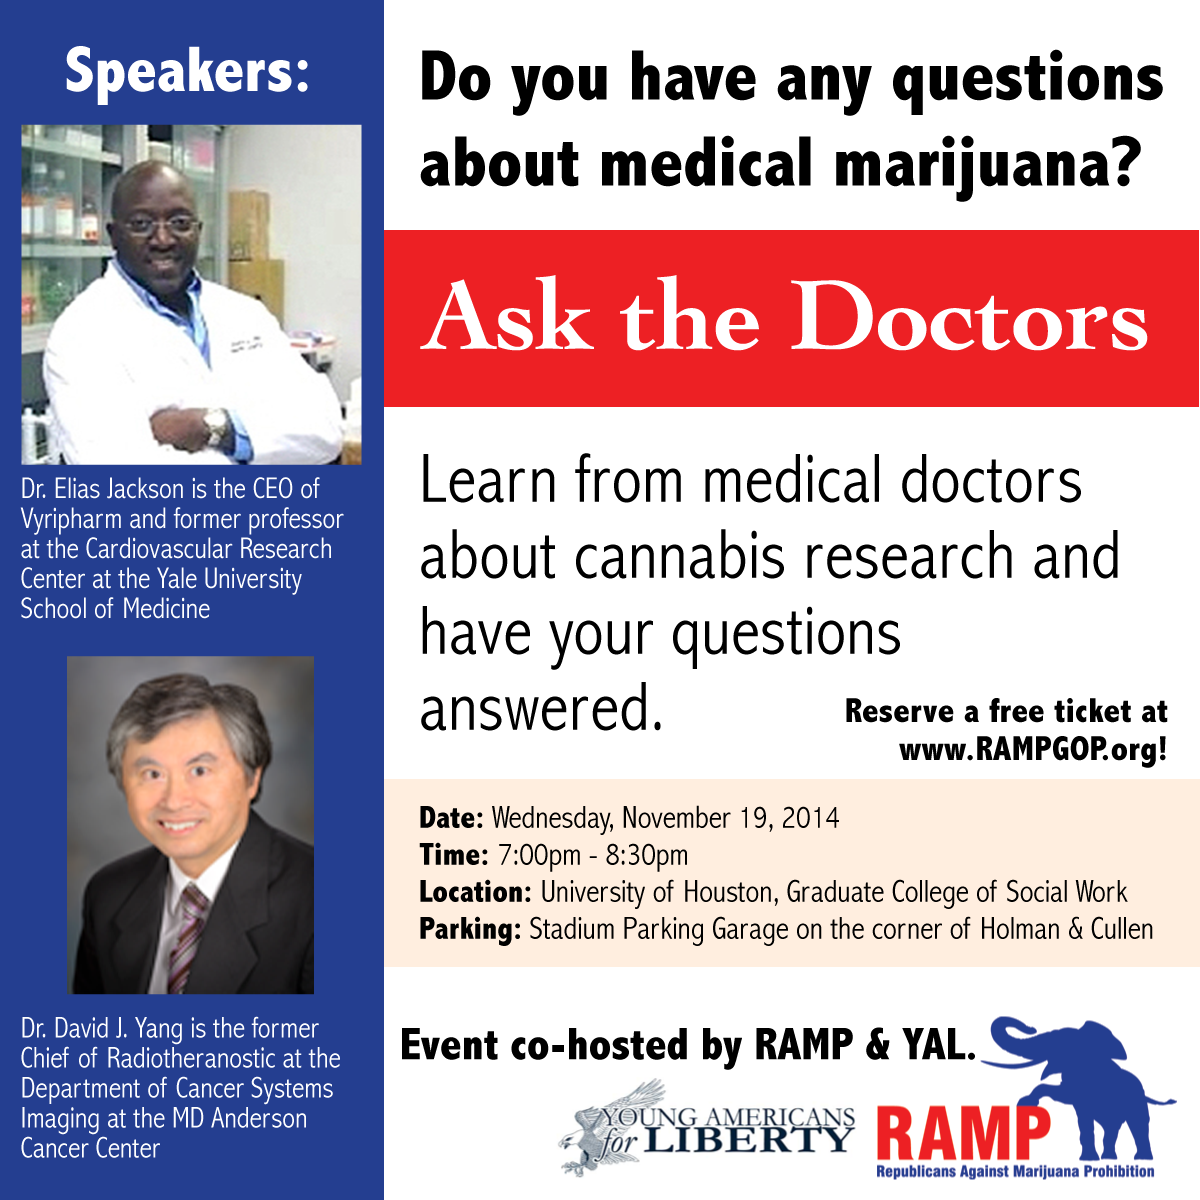 RAMP (Republicans Against Marijuana Prohibition) will host a forum with medical doctors answering questions about marijuana. It will be held on November 19, 2014 at the University of Houston Graduate School of Social Work.